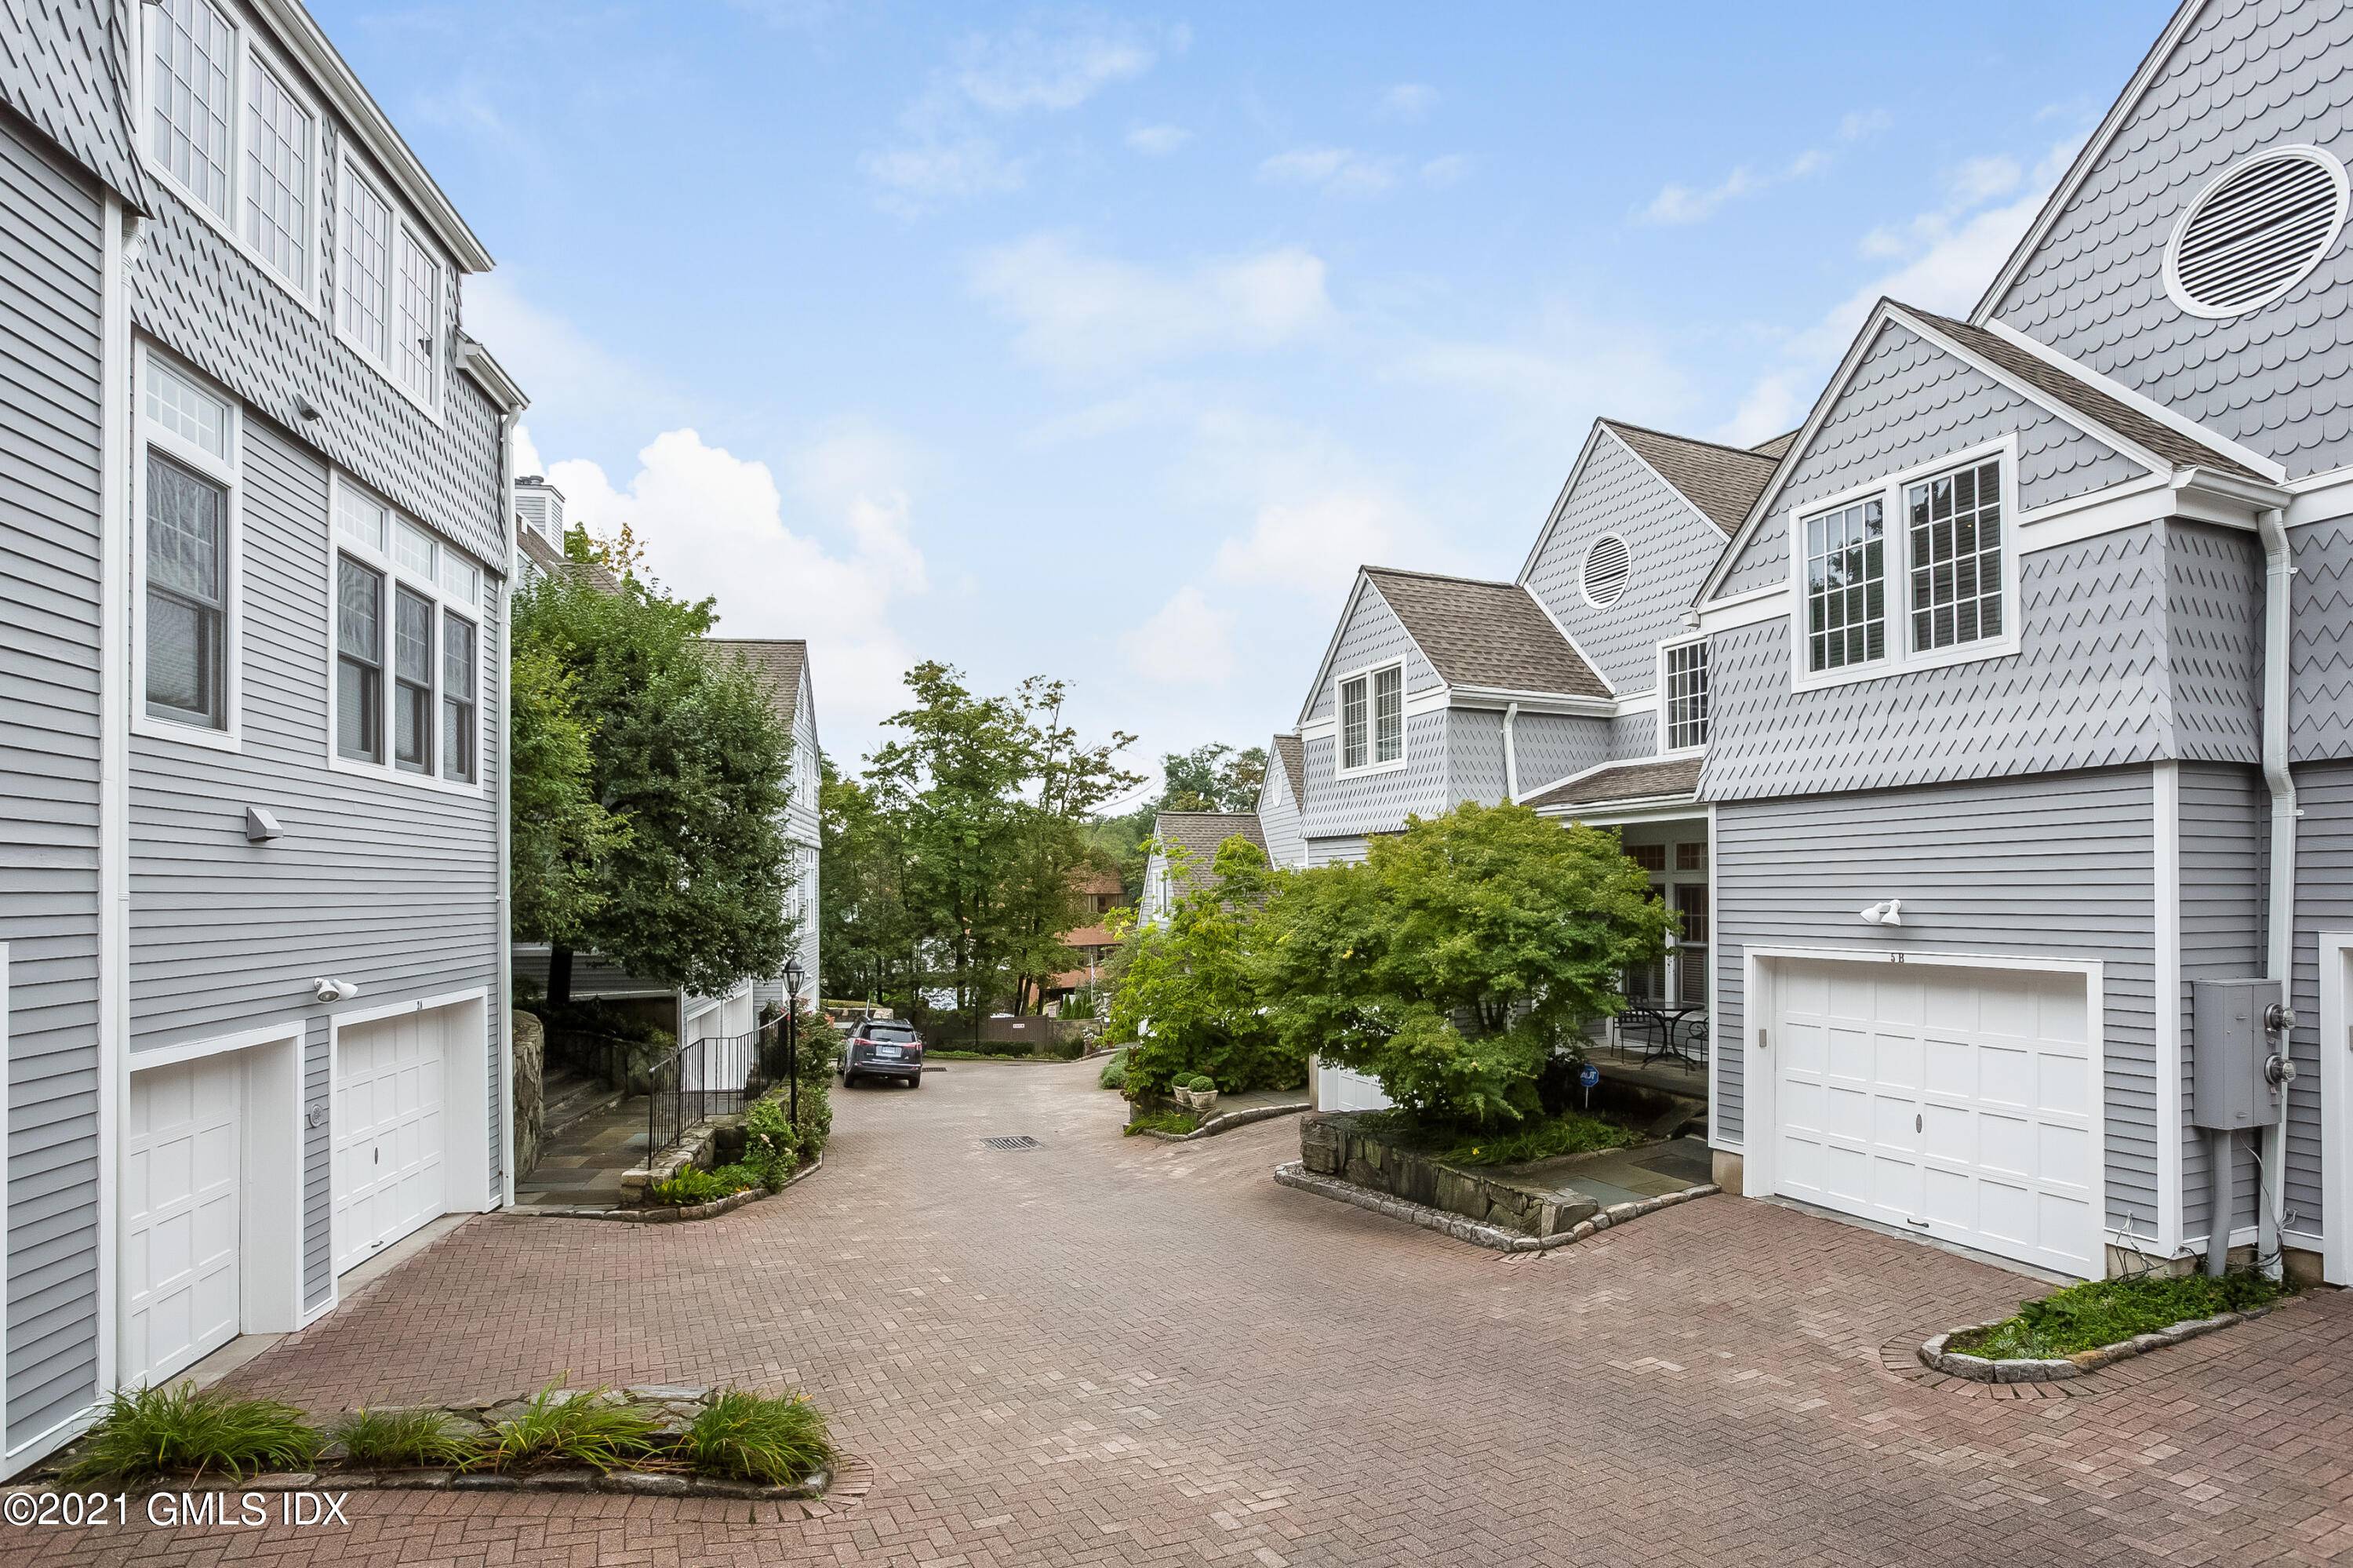 Nestled in a quiet enclave of just 13 homes this gorgeous condo has the feel of a single family home.